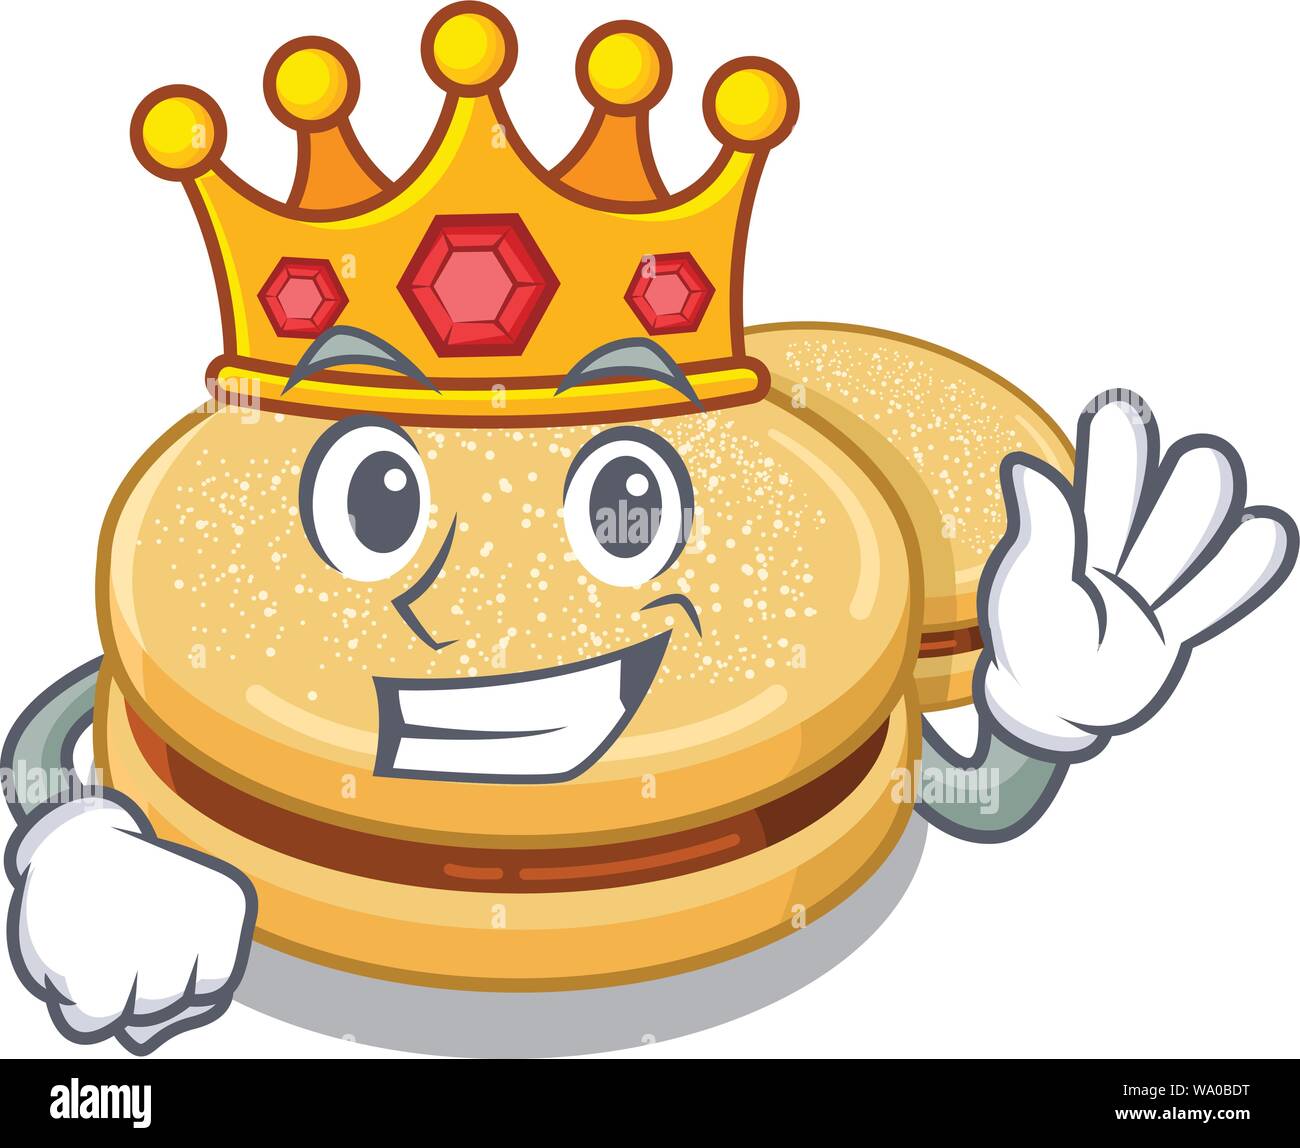 King alfajores isolated with in the mascot Stock Vector